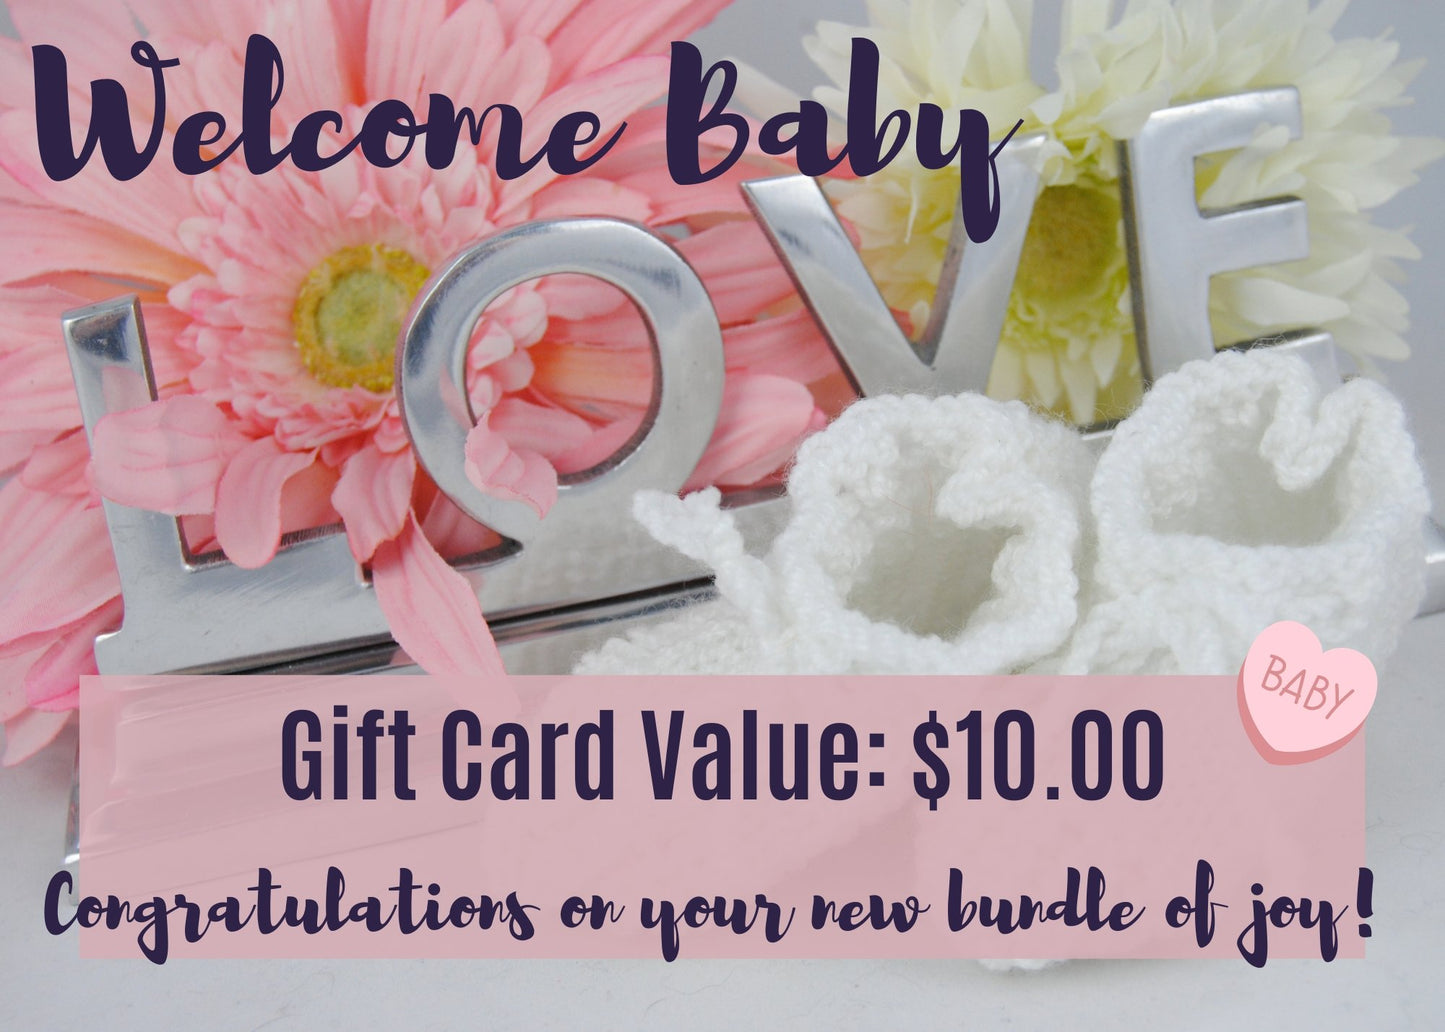 BGShop New Baby Gift Card